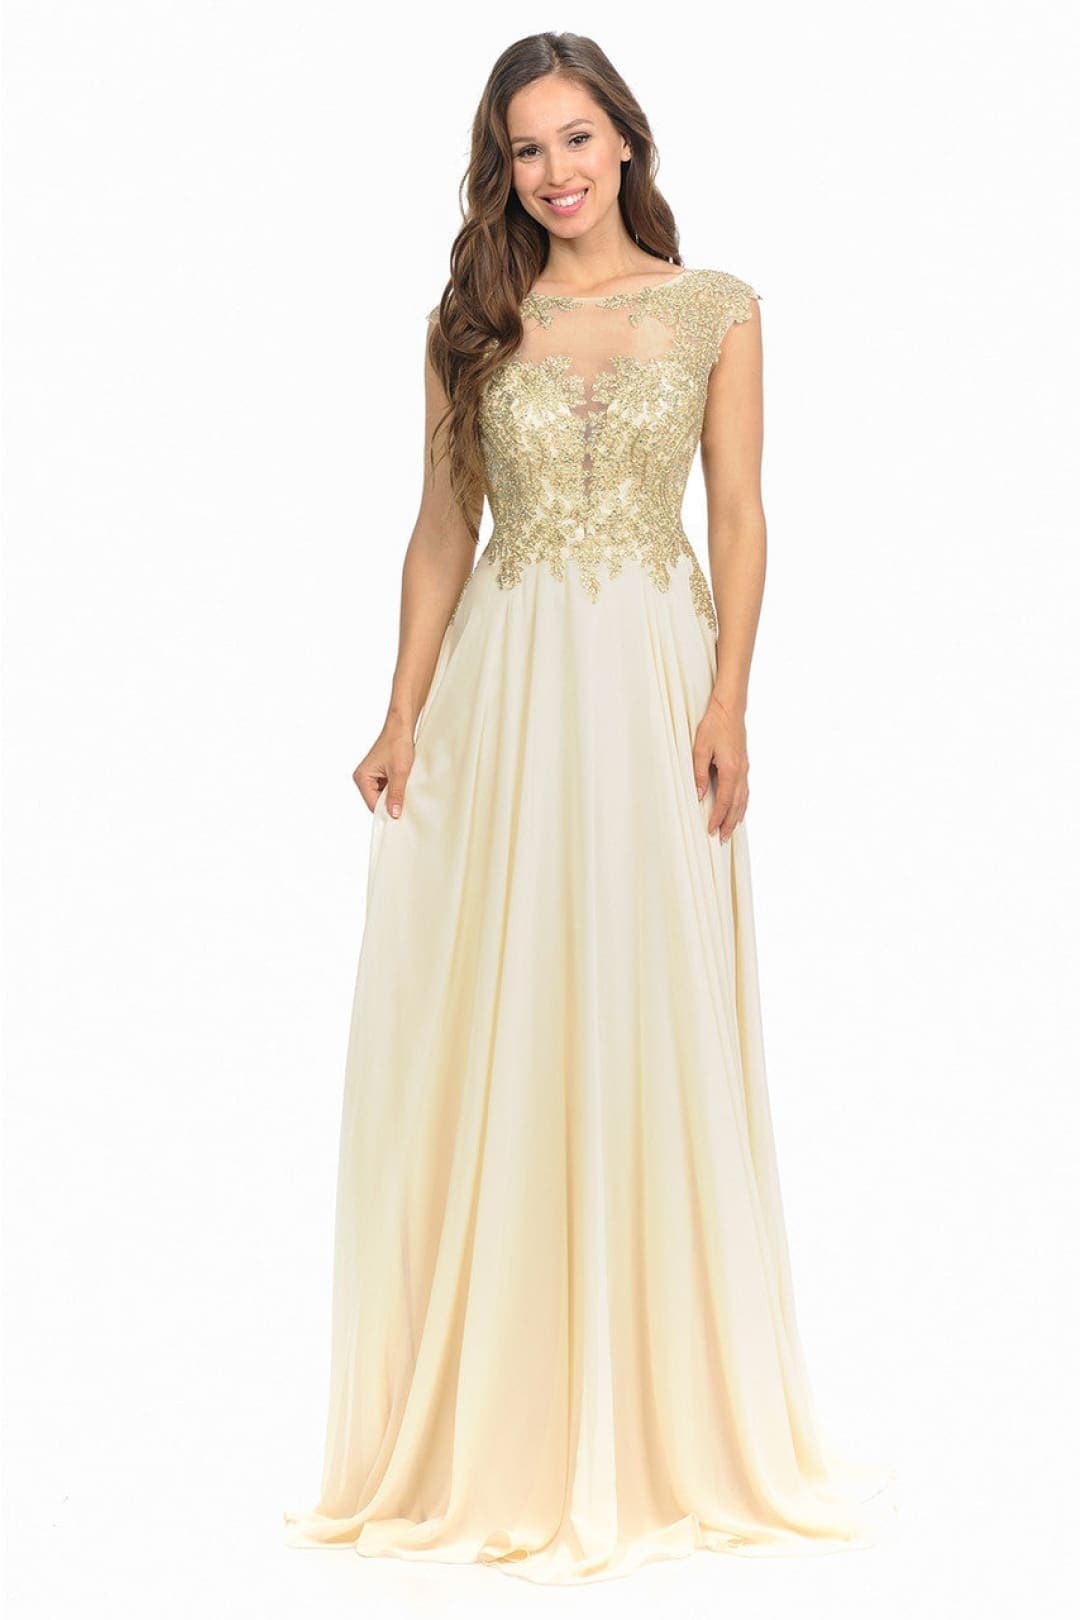 Classy Special Occasion Gown - CHAMPAGNE / XS